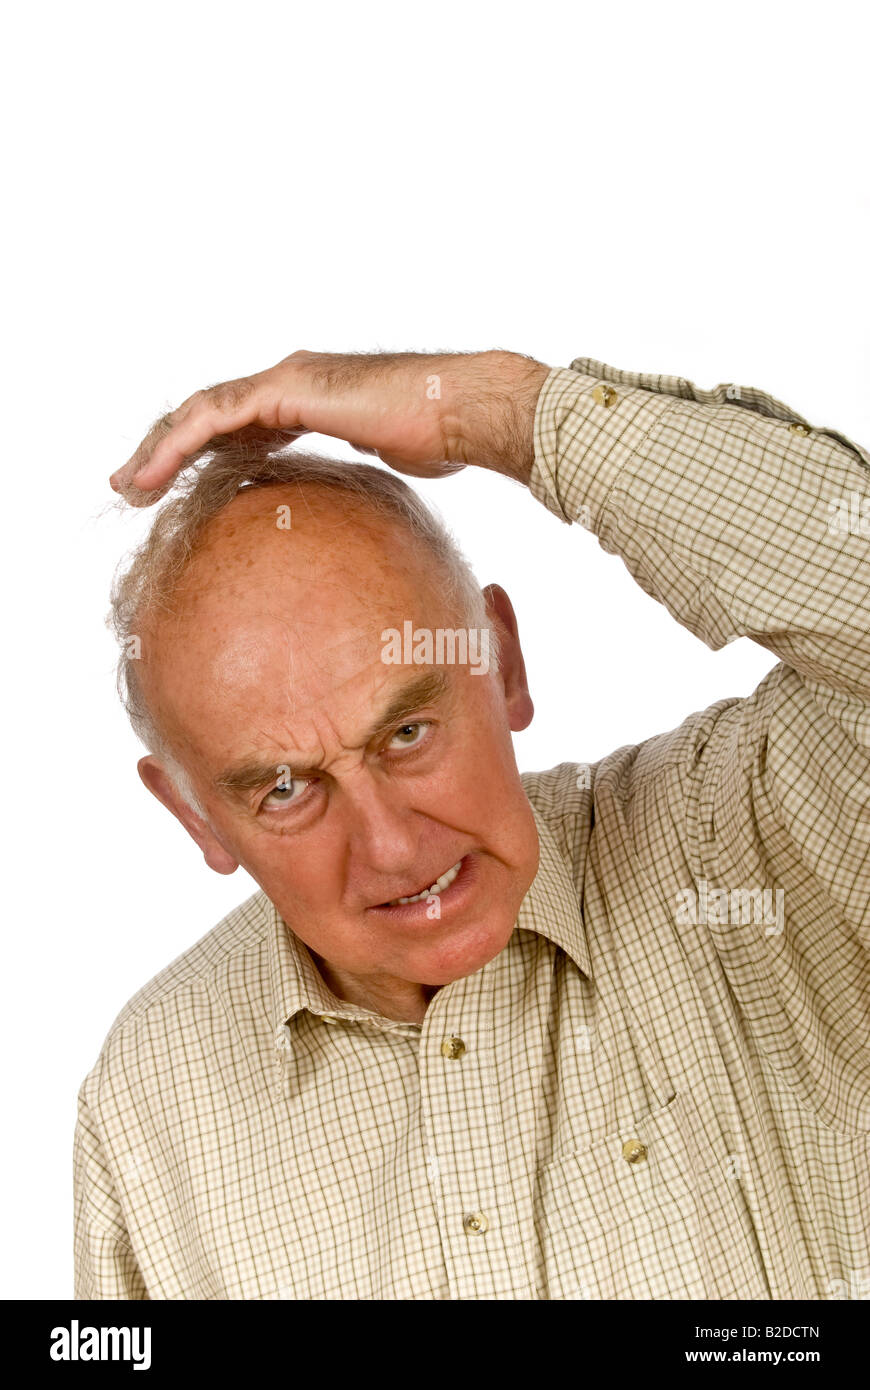 Vertical close up portrait of an elderly gentleman supporting a lengthy comb over hairstyle Stock Photo